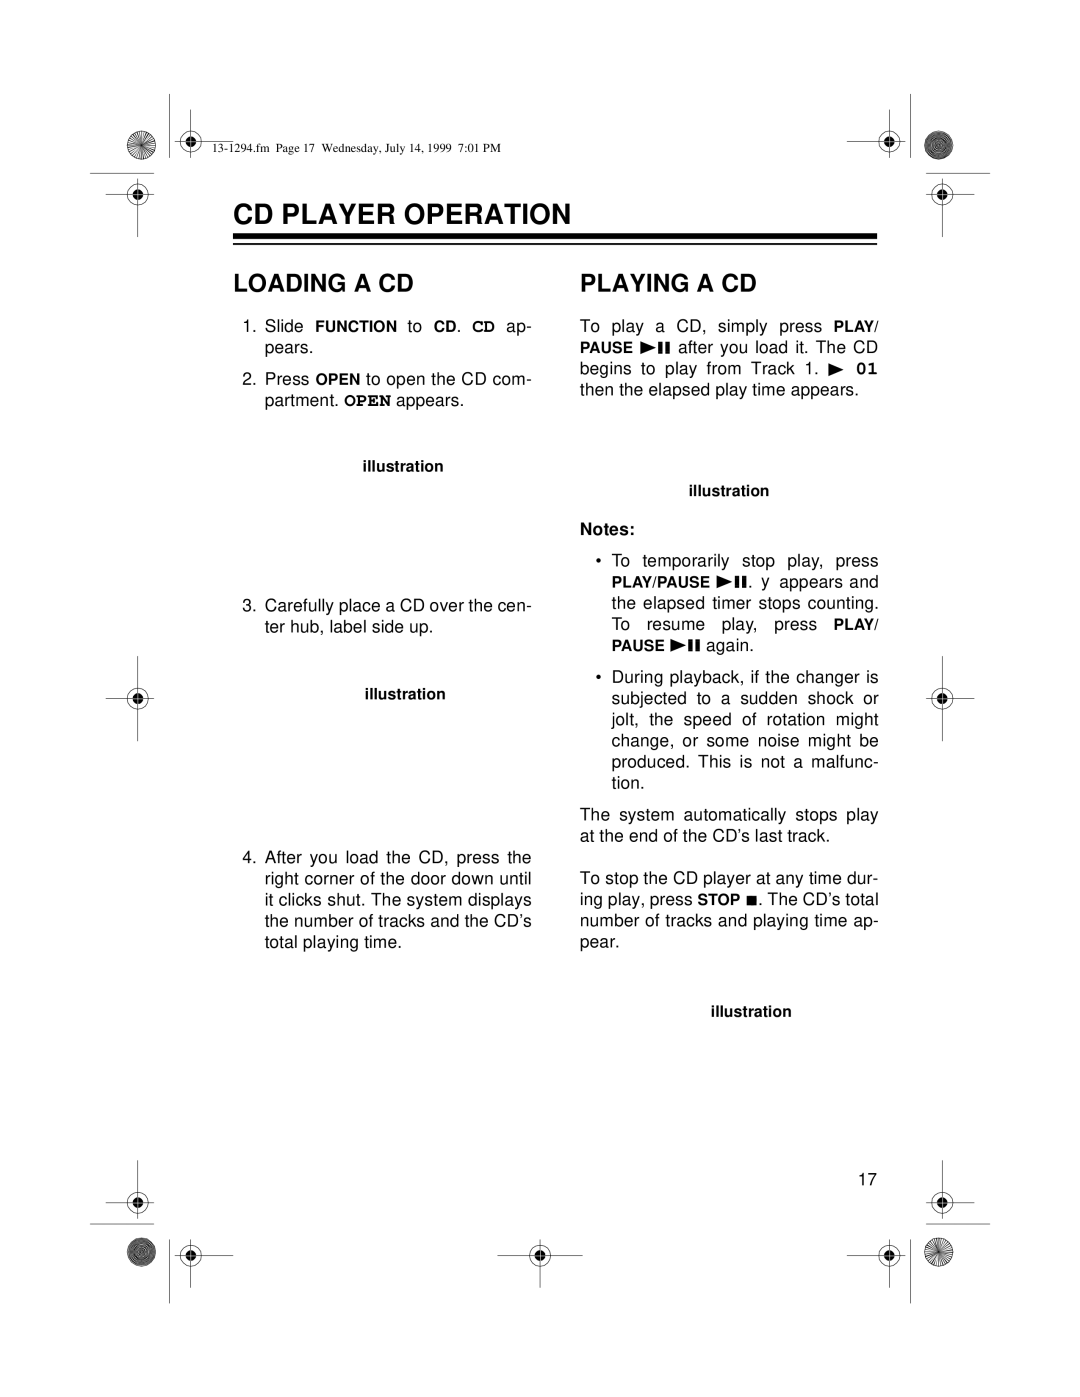 Optimus SYSTEM 746 owner manual Cd Player Operation, Loading A Cd, Playing A Cd 